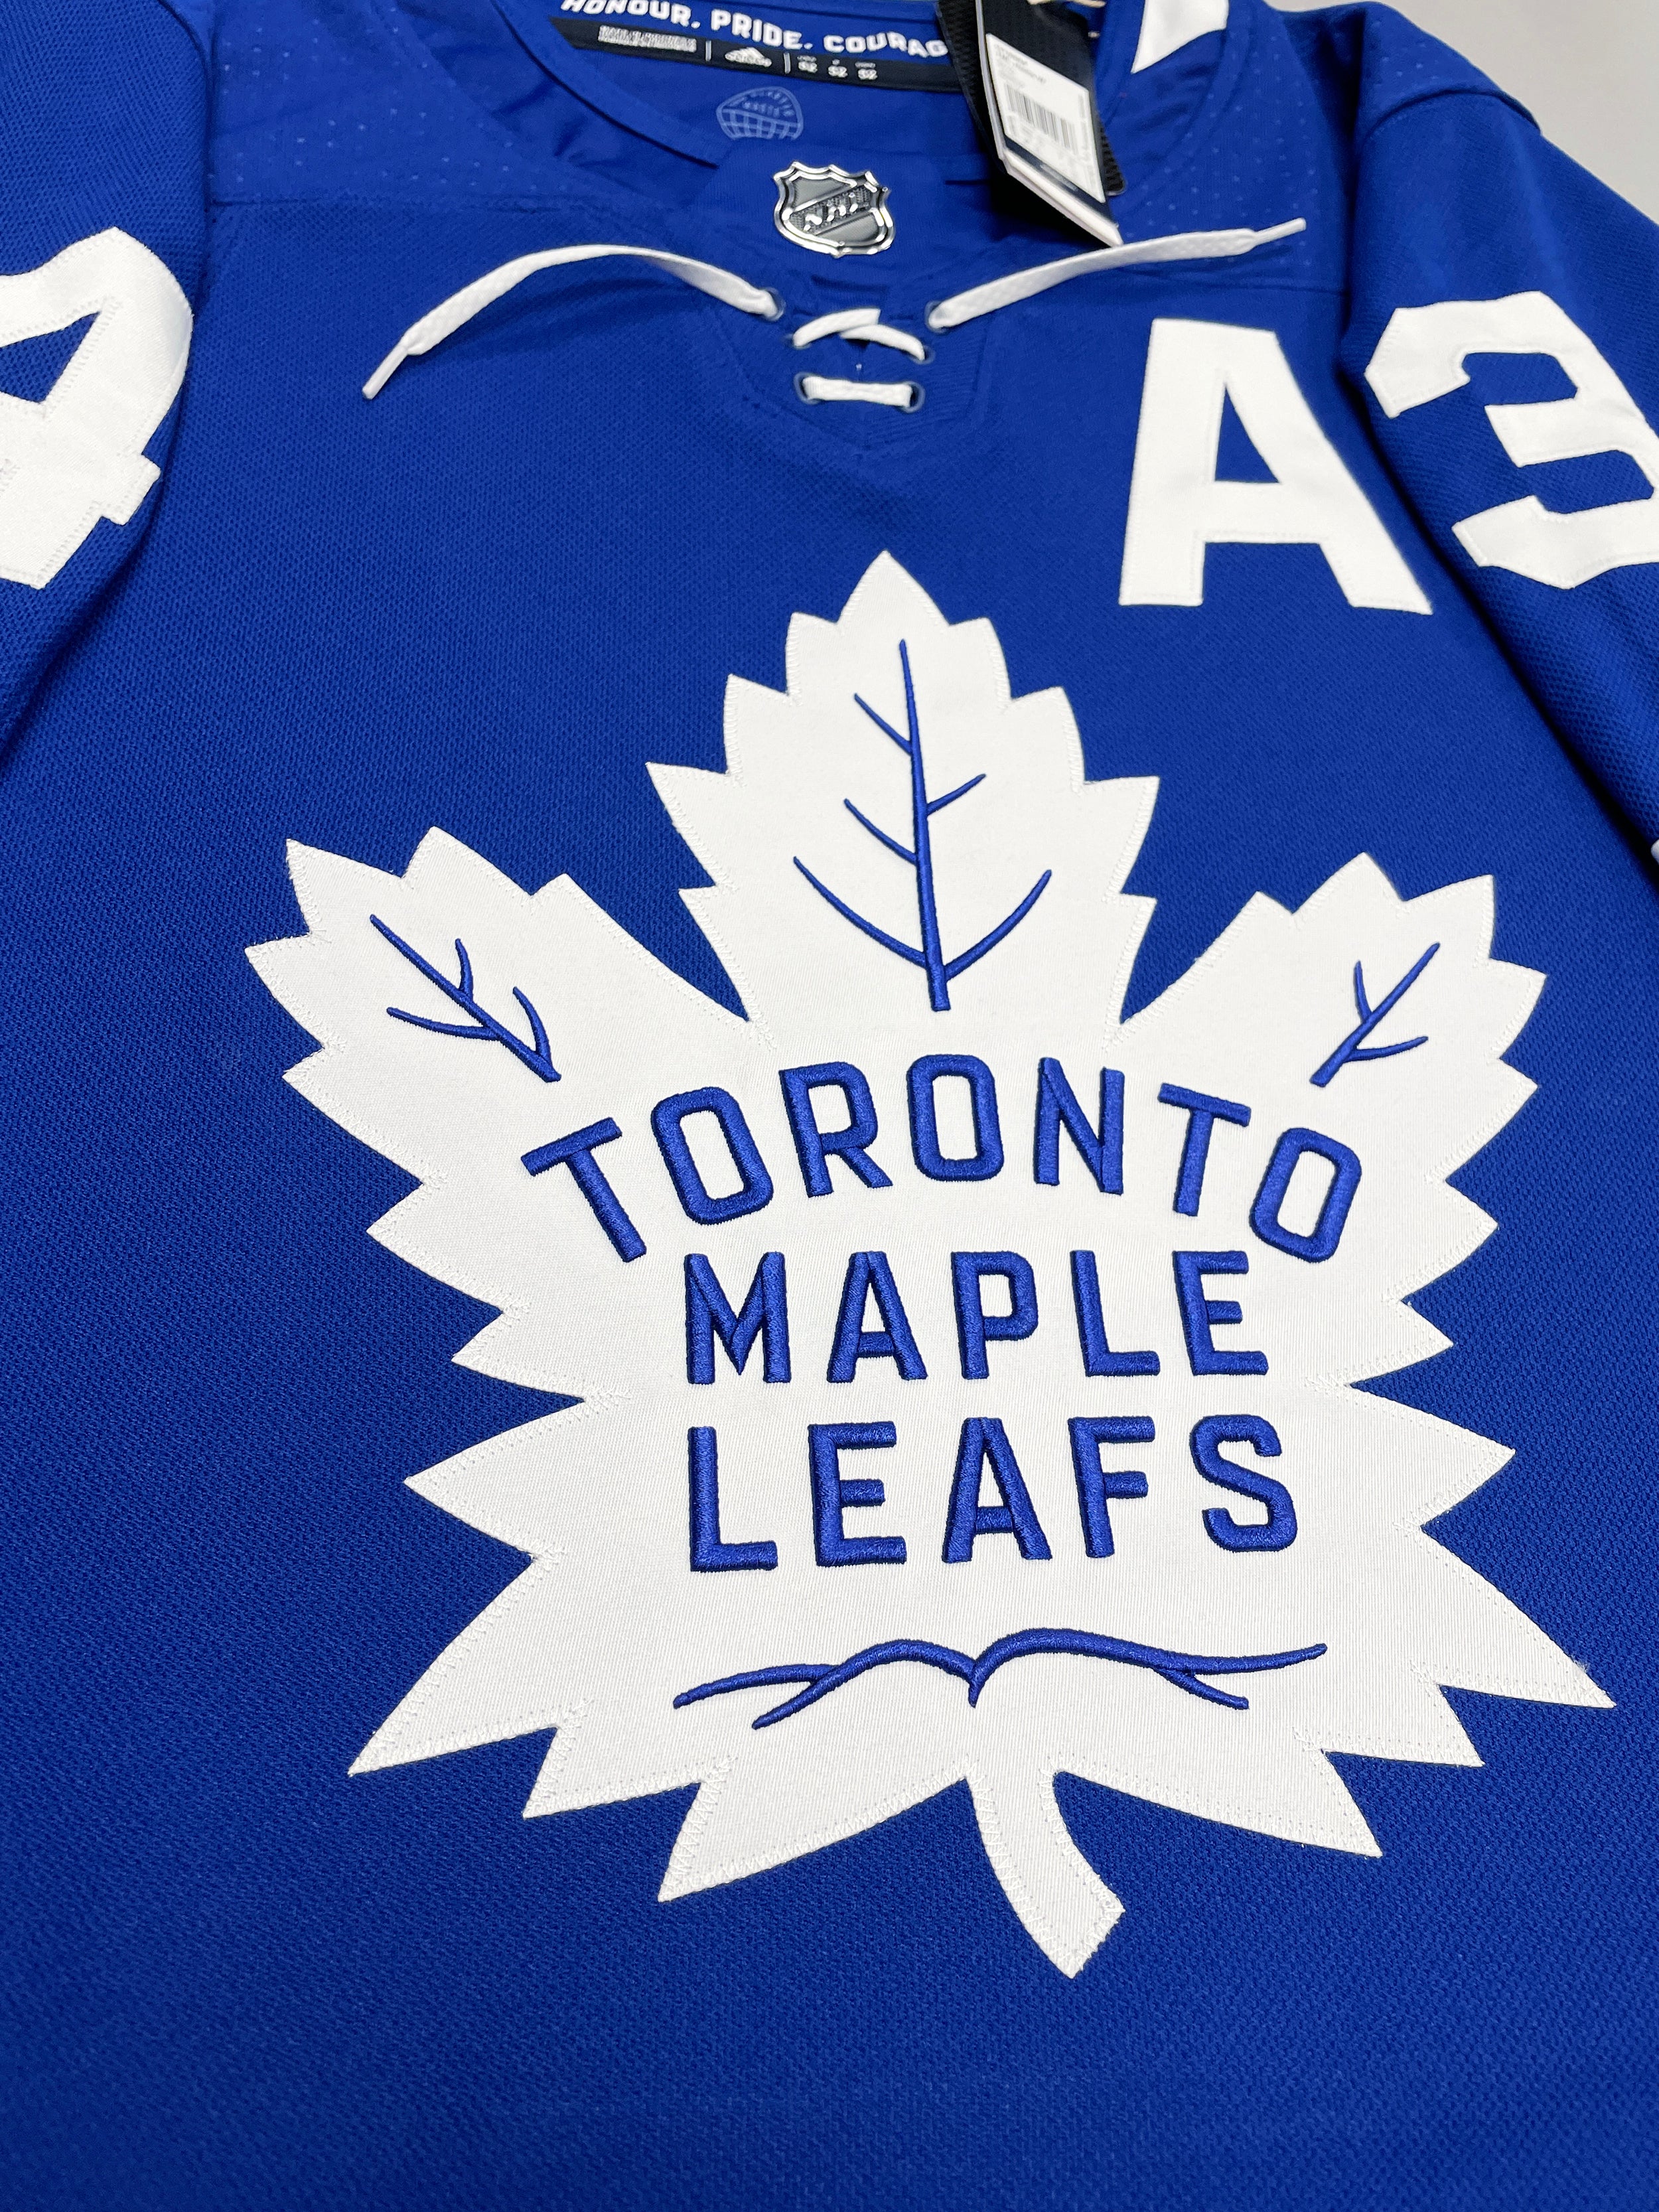 Authentic Adidas Toronto Maple Leafs Jersey